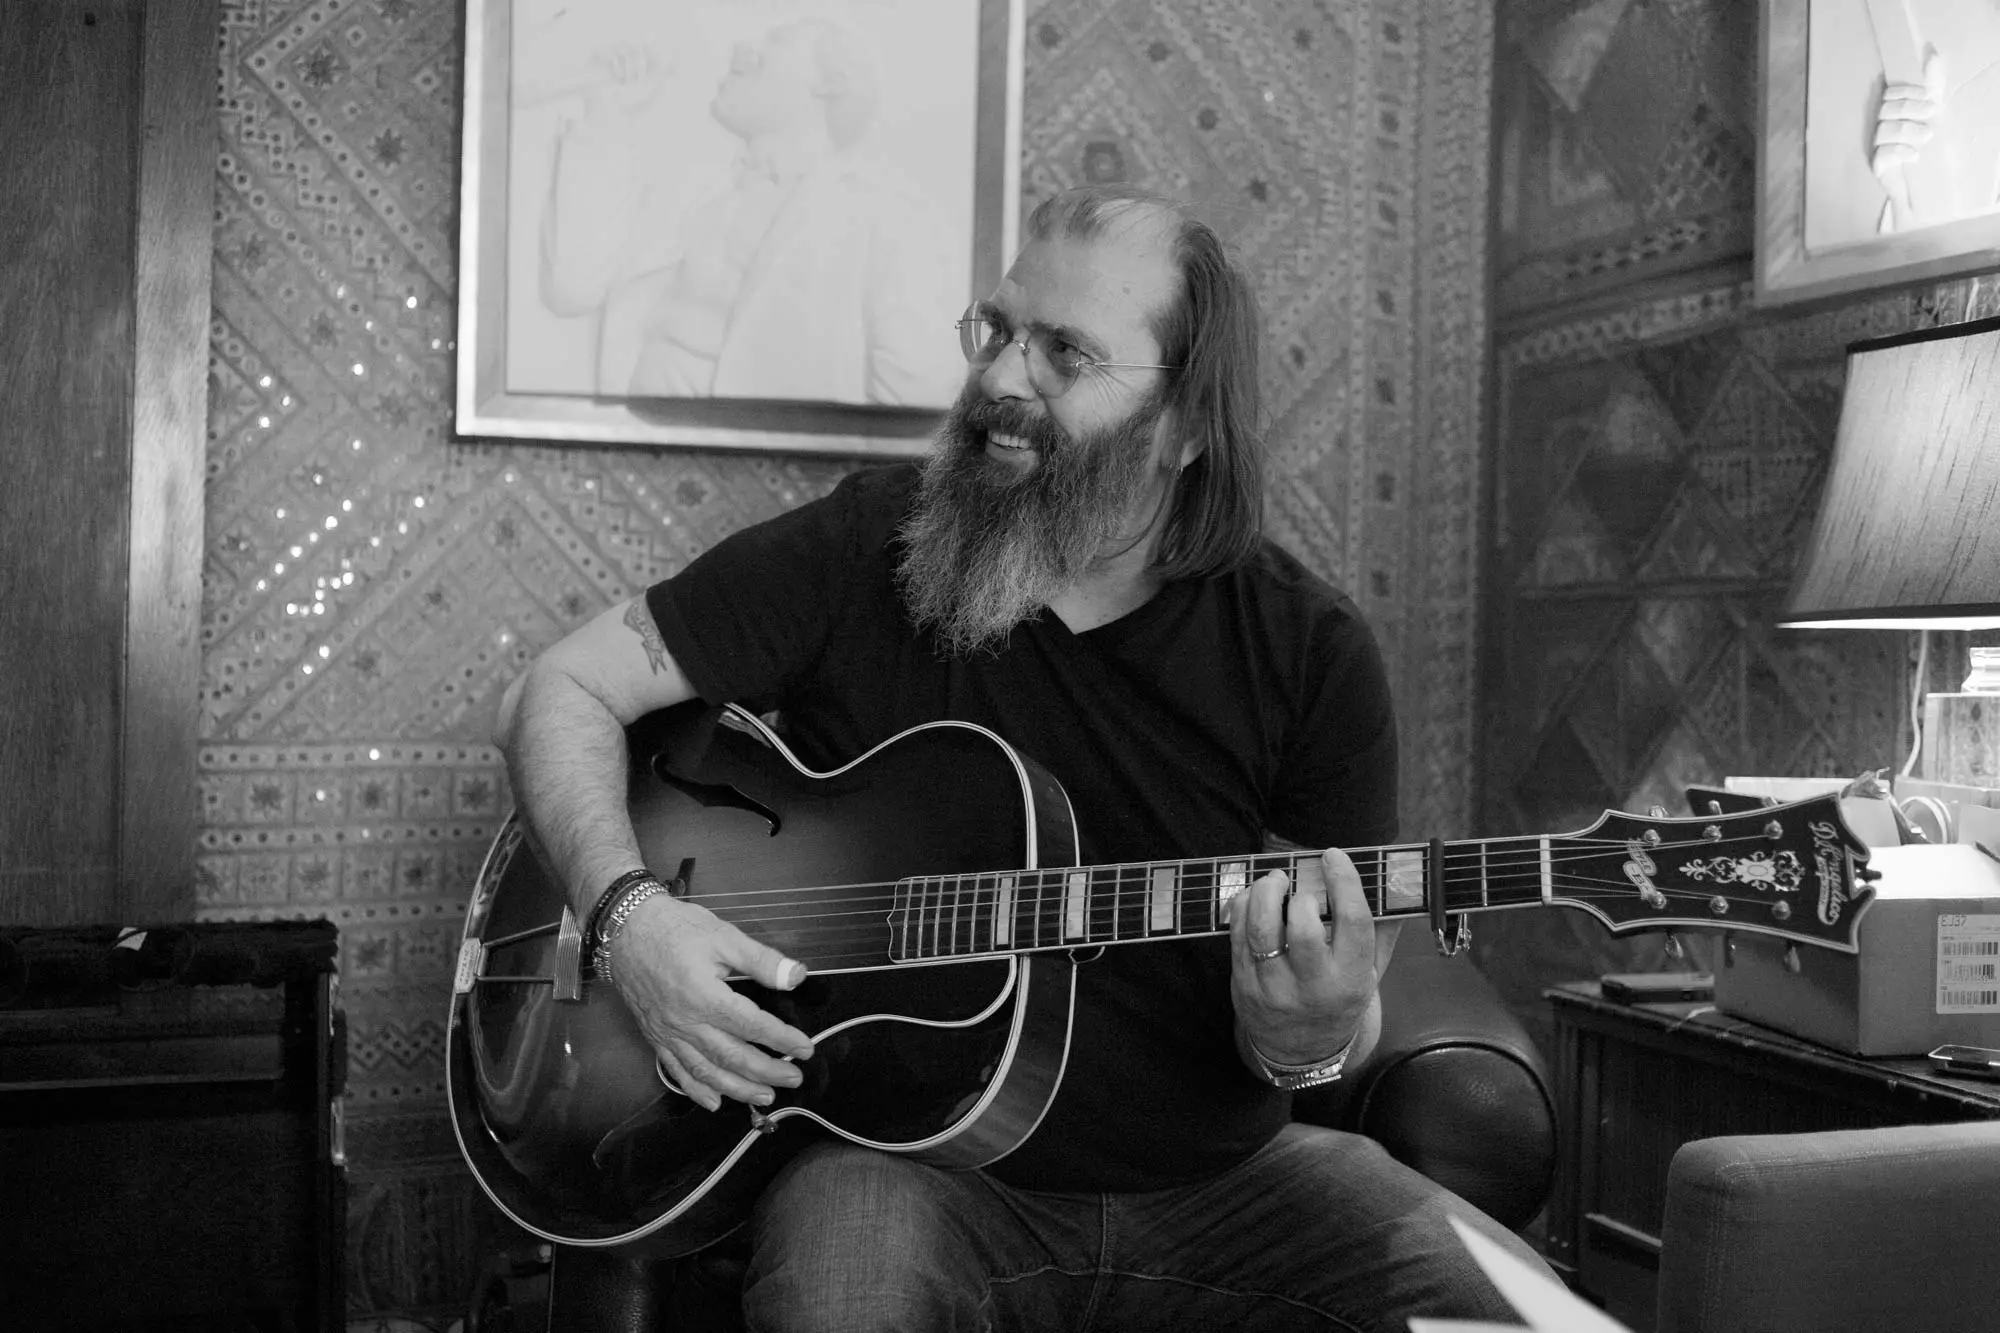 At Nashville Gig, Outlaw Folkie Steve Earle Honors Late Mentor Guy Clark with “Goodbye Michelangelo”